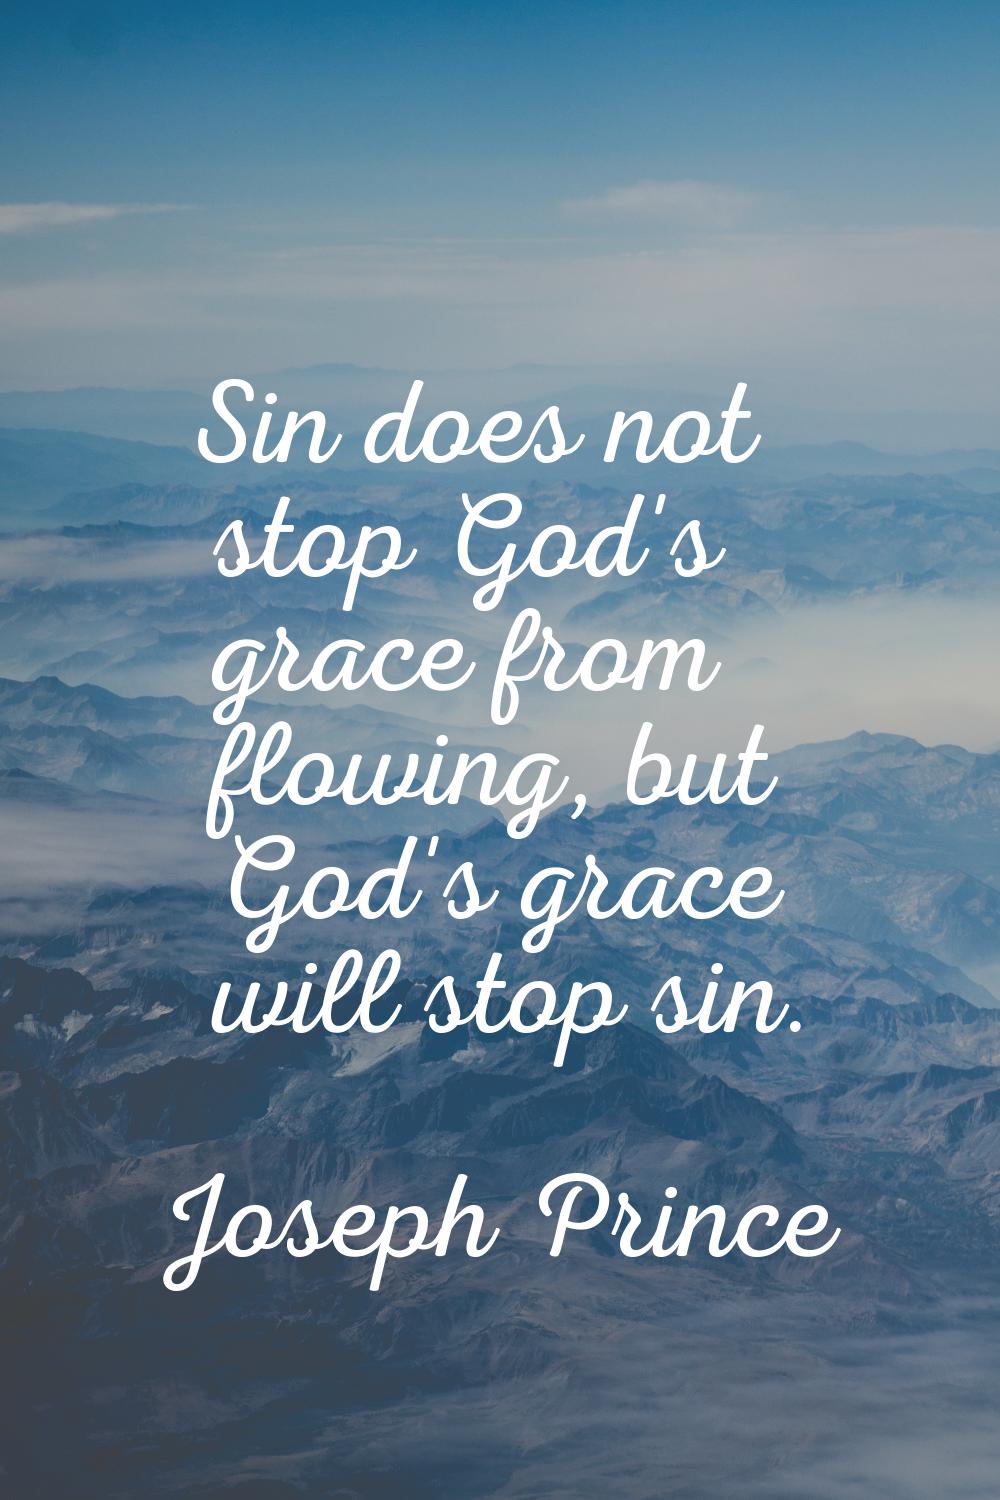 Sin does not stop God's grace from flowing, but God's grace will stop sin.